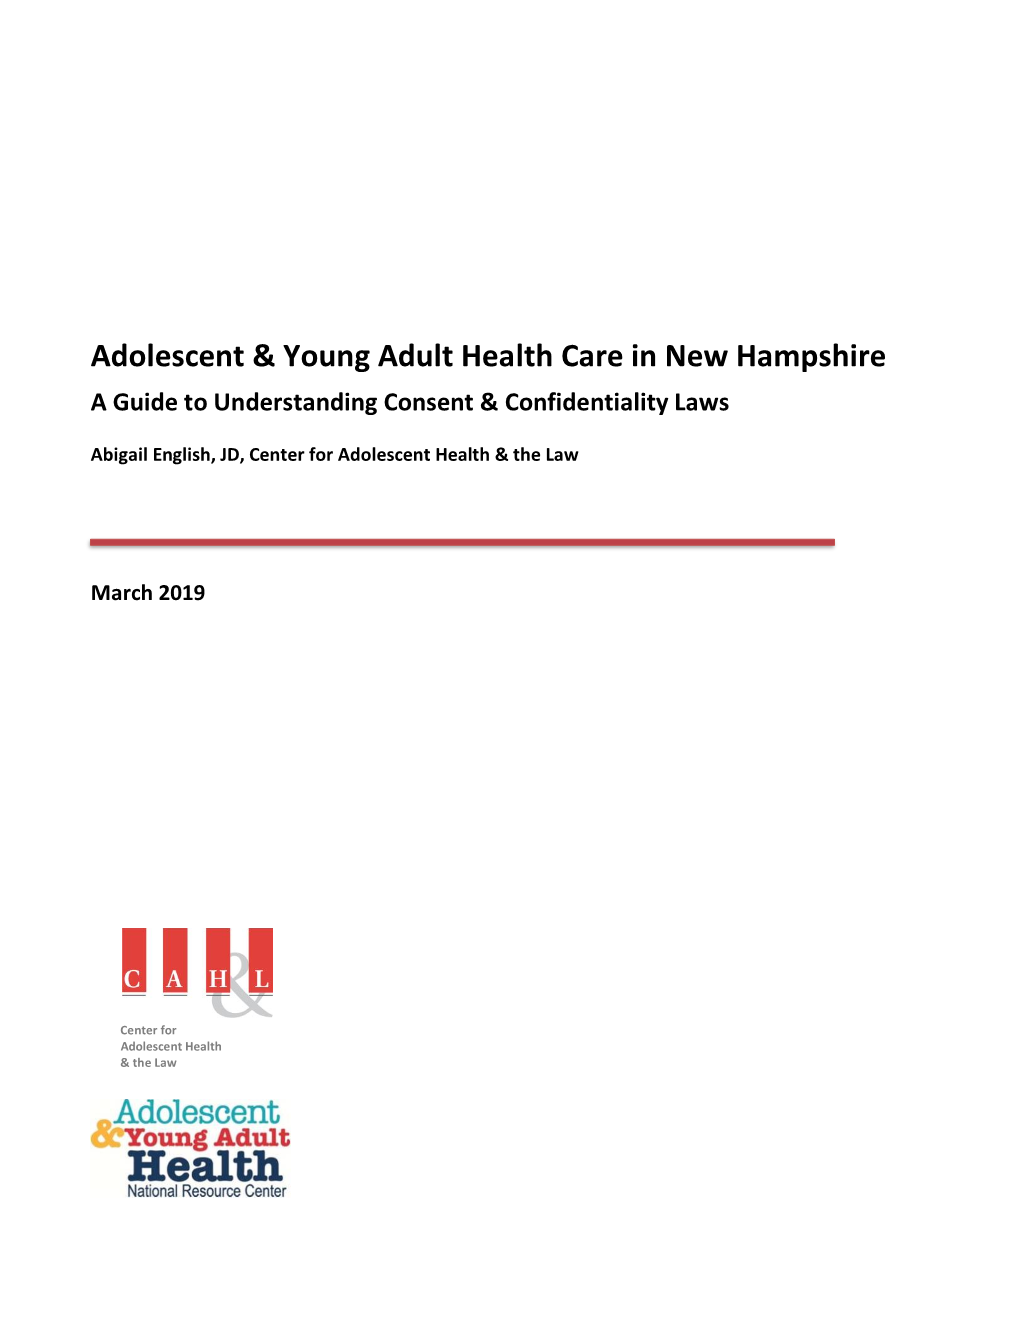 Adolescent & Young Adult Health Care in New Hampshire